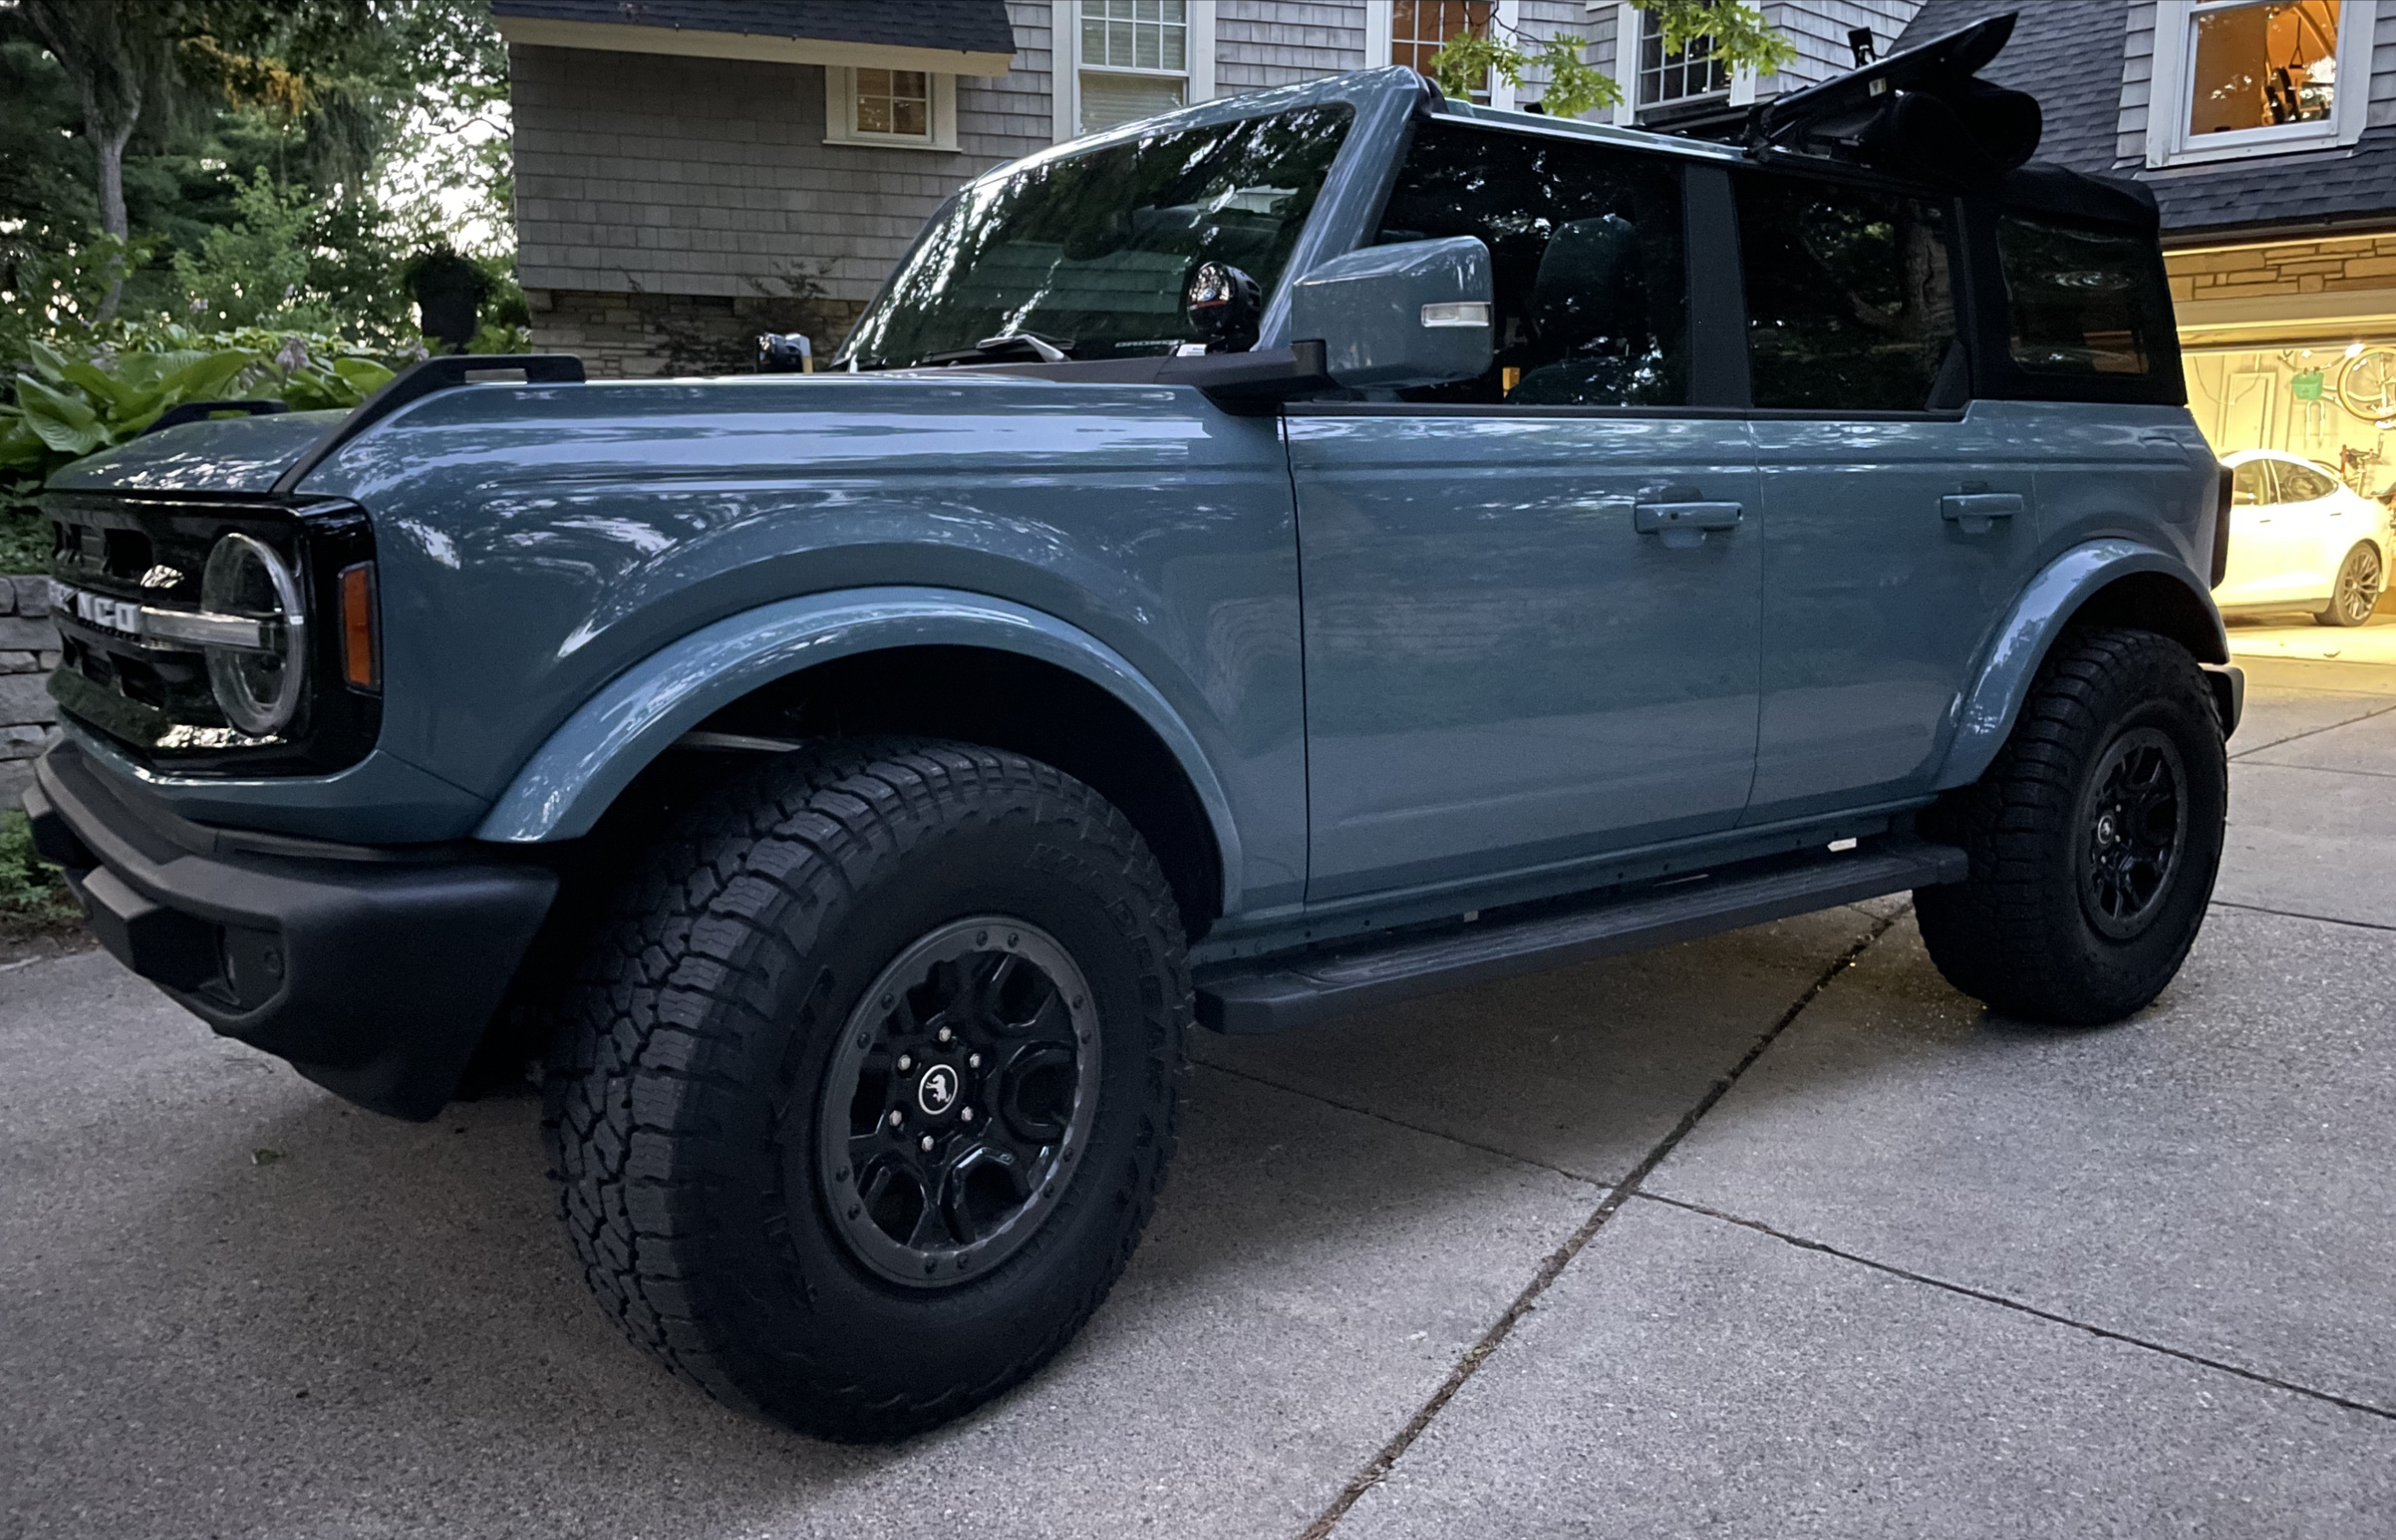 Ford Bronco Tint reference gallery -- post your Bronco pics & specs 📸 😎 9C995751-8BBE-4494-9596-F37E84C46940